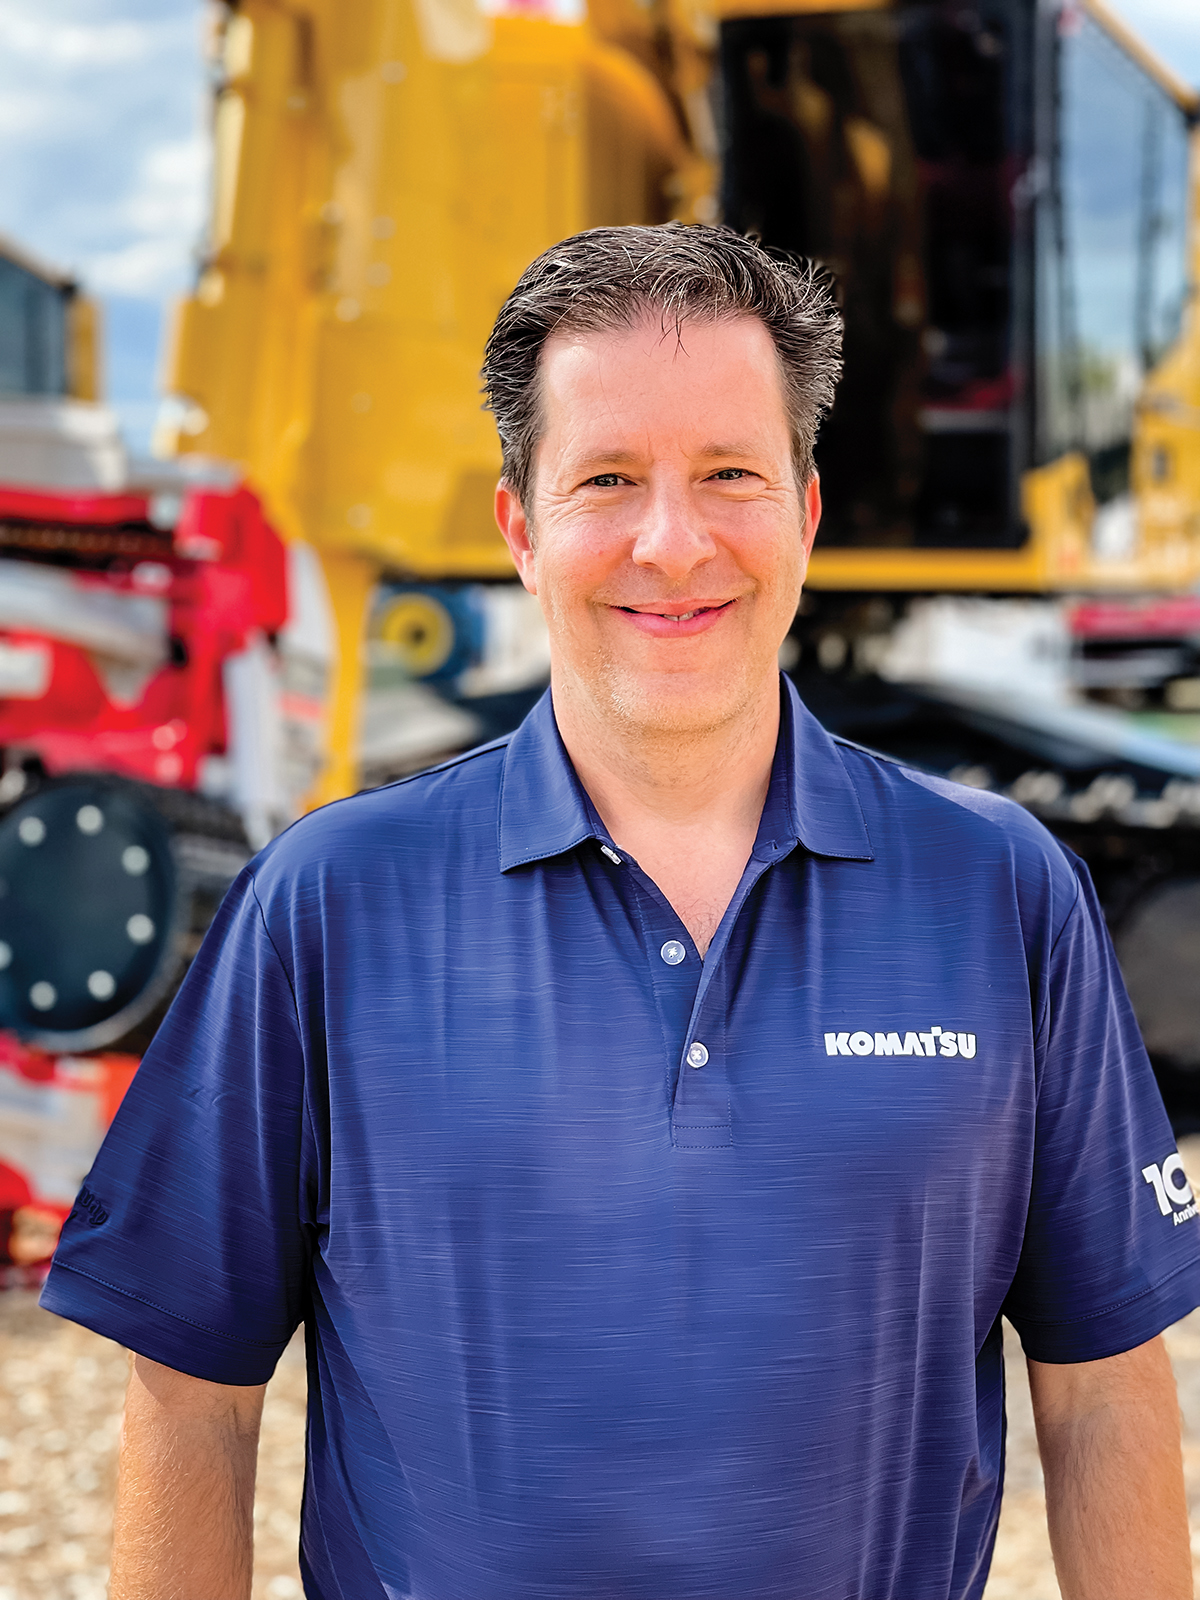 An image of Kyle Kovach, Product Planning Manager, Komatsu Forest